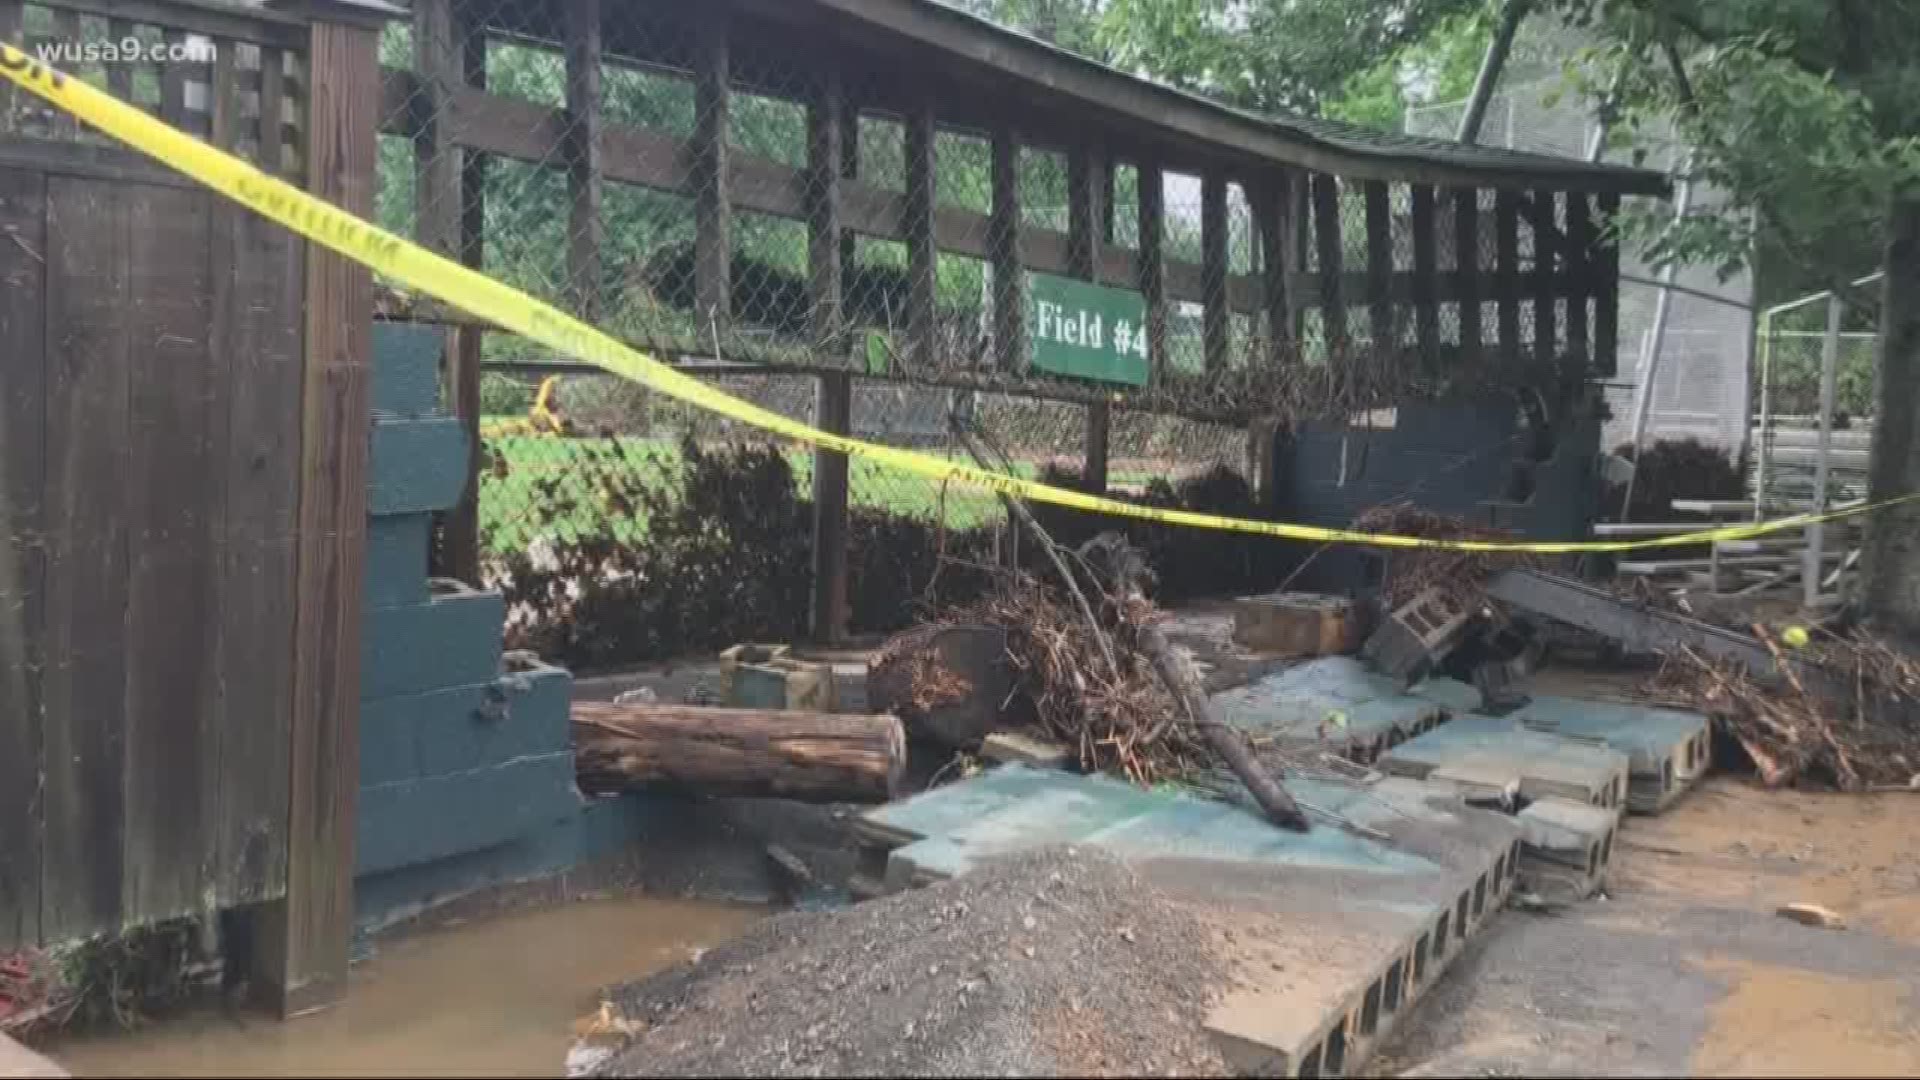 One of the hardest hit areas Monday was McLean, Virginia. Rain pounded the area at a rate of between three and four inches per hour. The McLean Little League Field is a disaster.